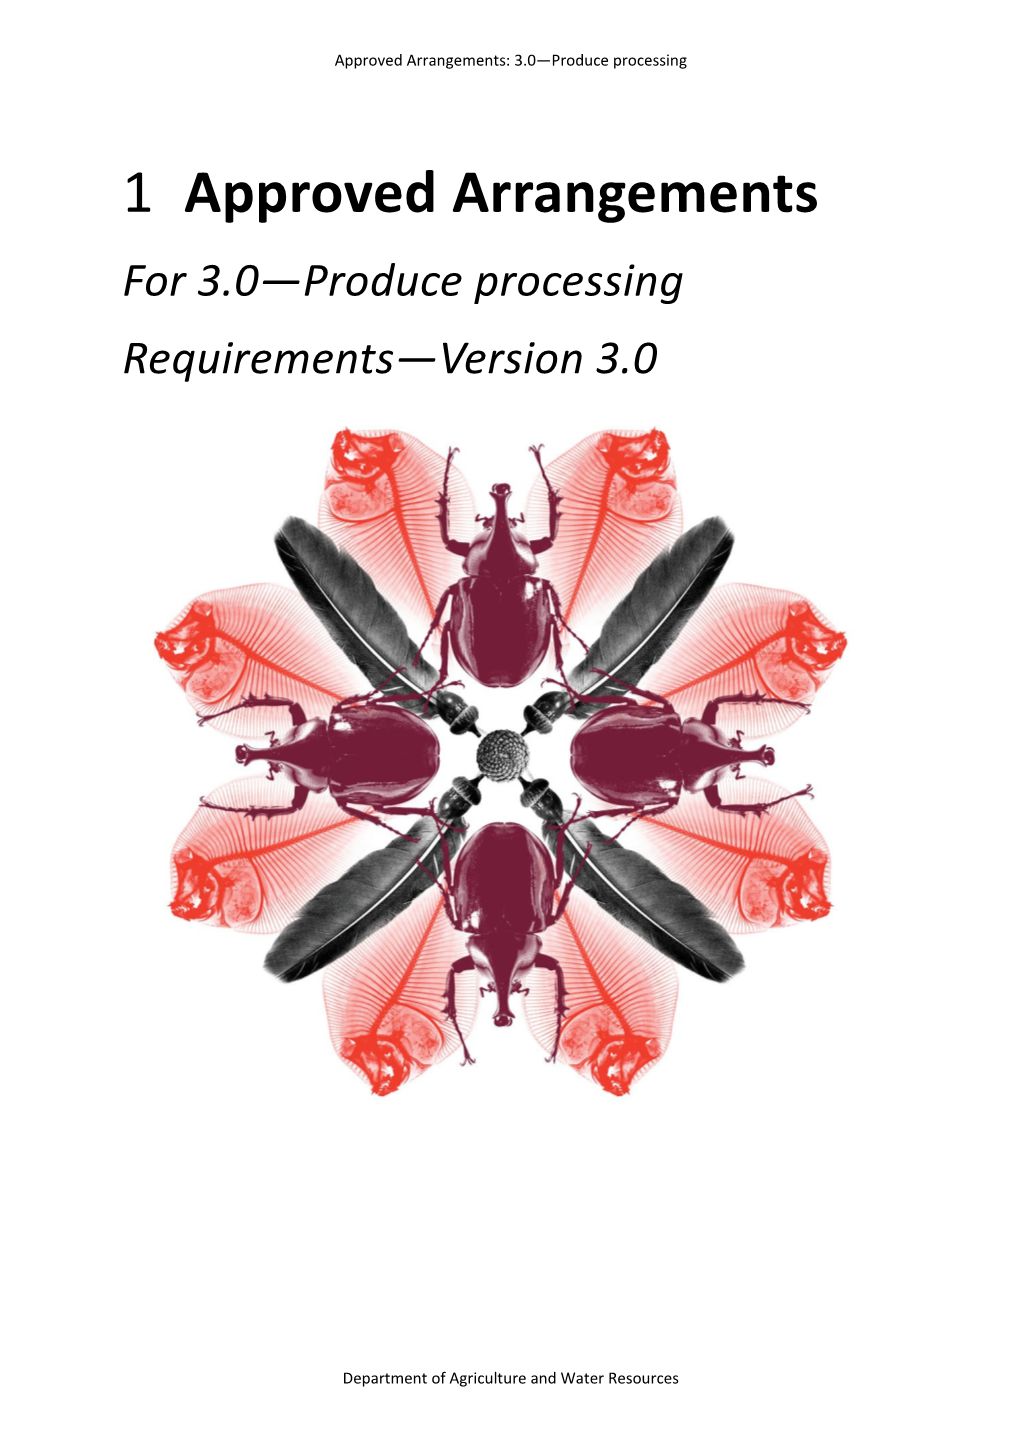 Approved Arrangements for 3.0 - Produce Processing